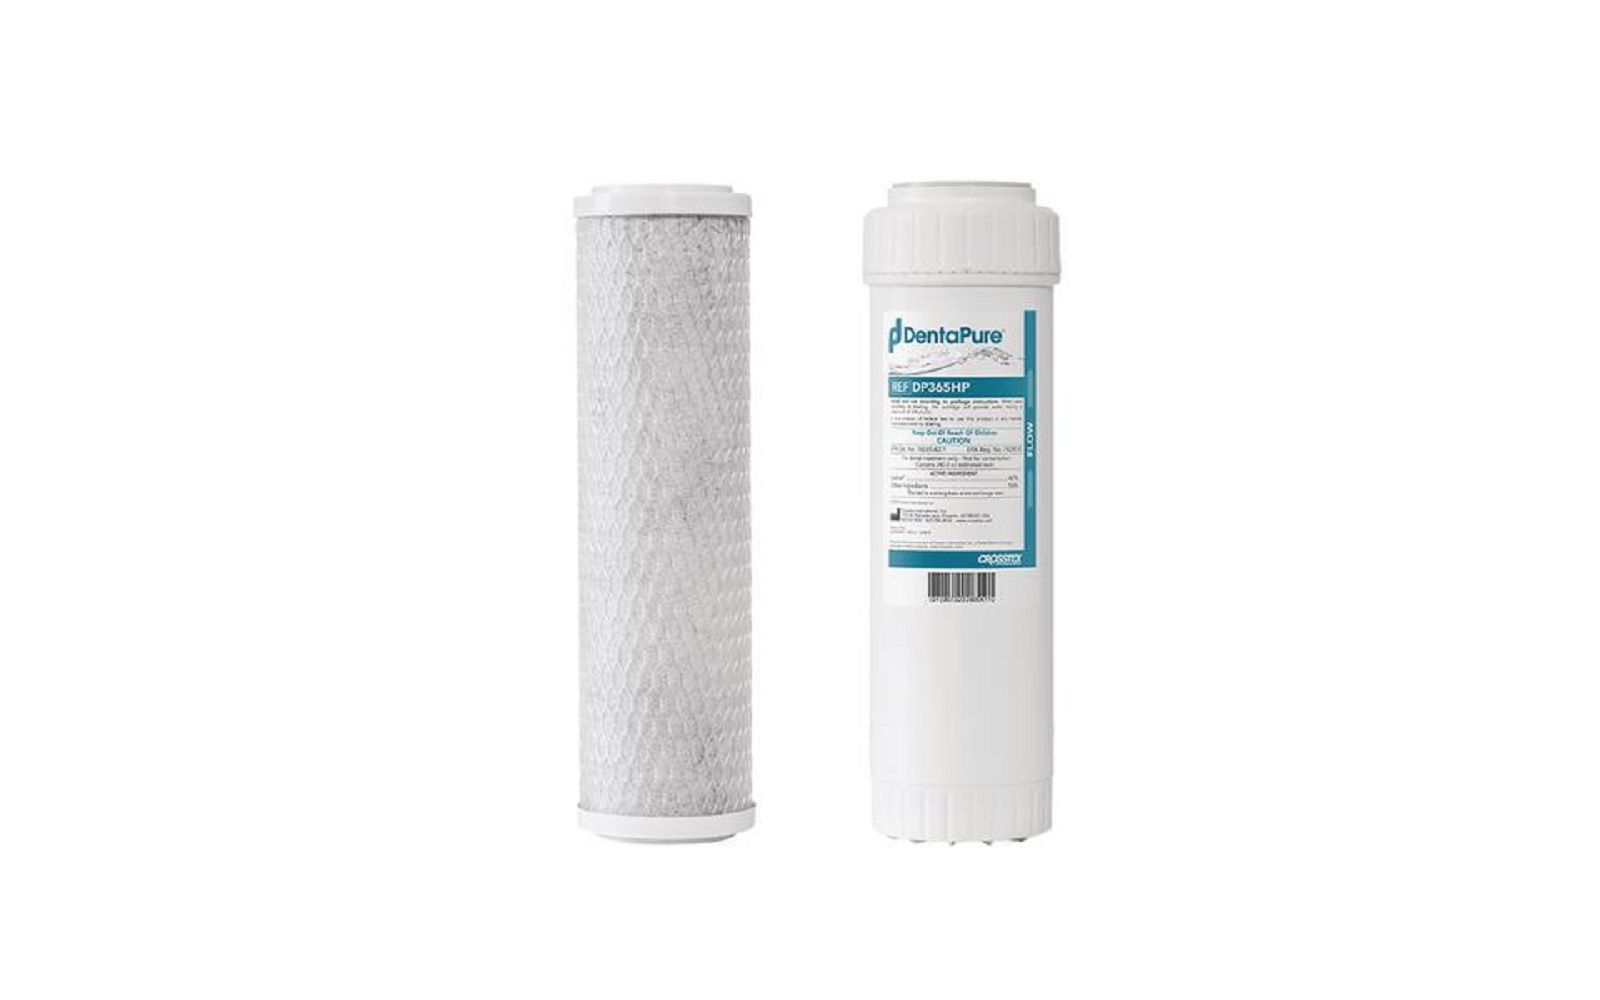 Annual replacement kit for vistaclear™ centralized water filtration system